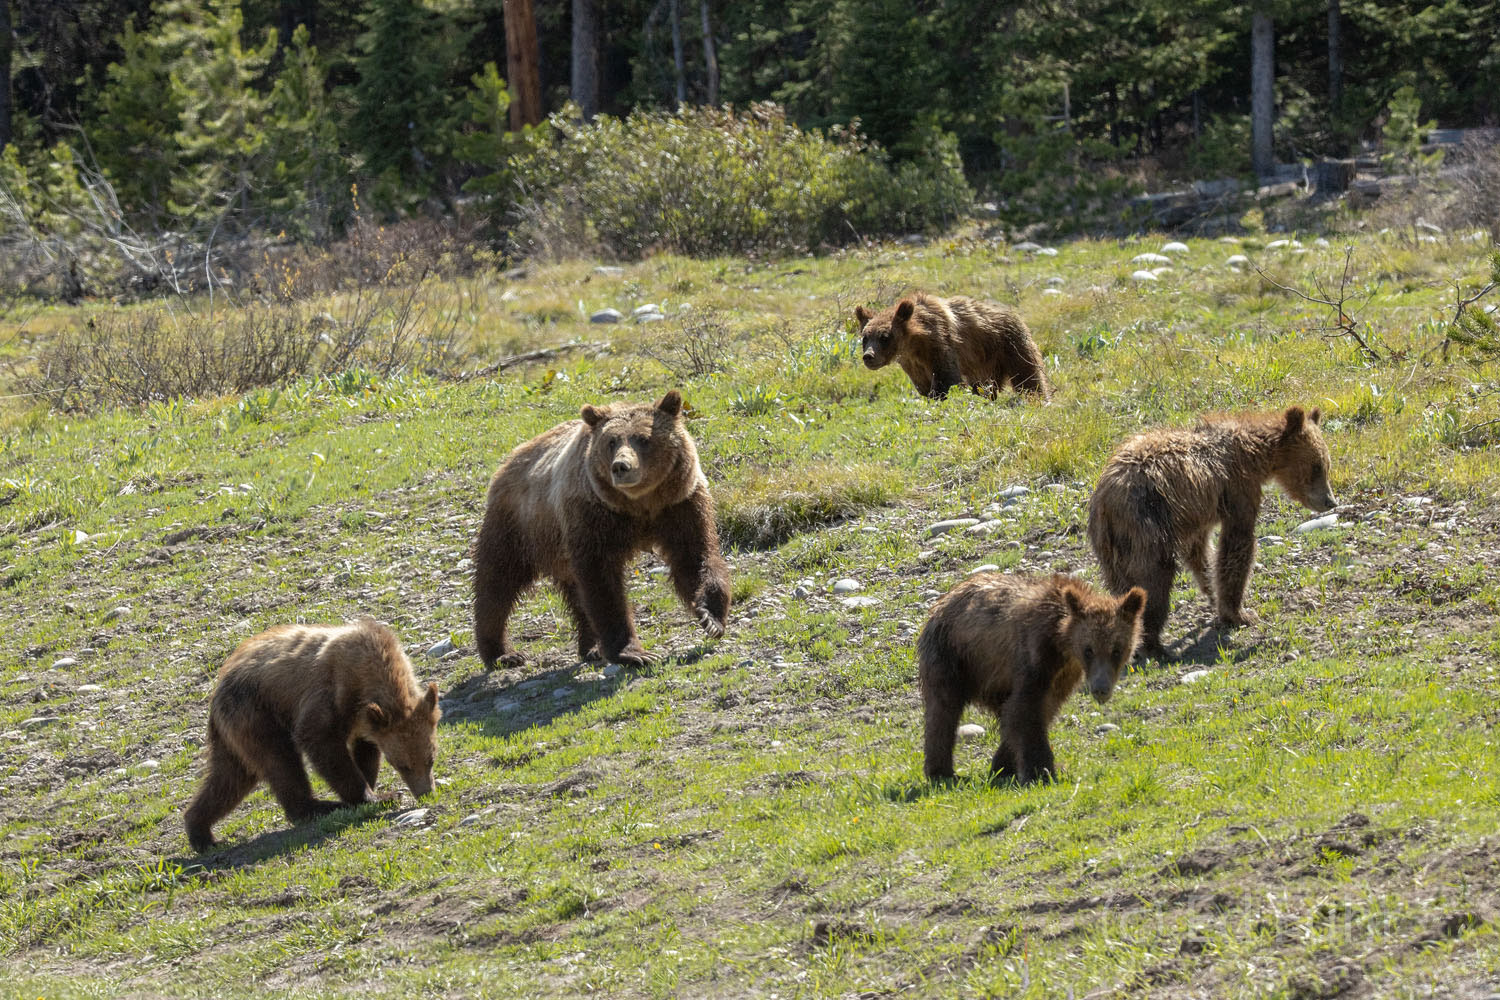 Spring has gotten an earlier start on this hillside and this family of bears welcomes the opportunity to graze on some of spring...